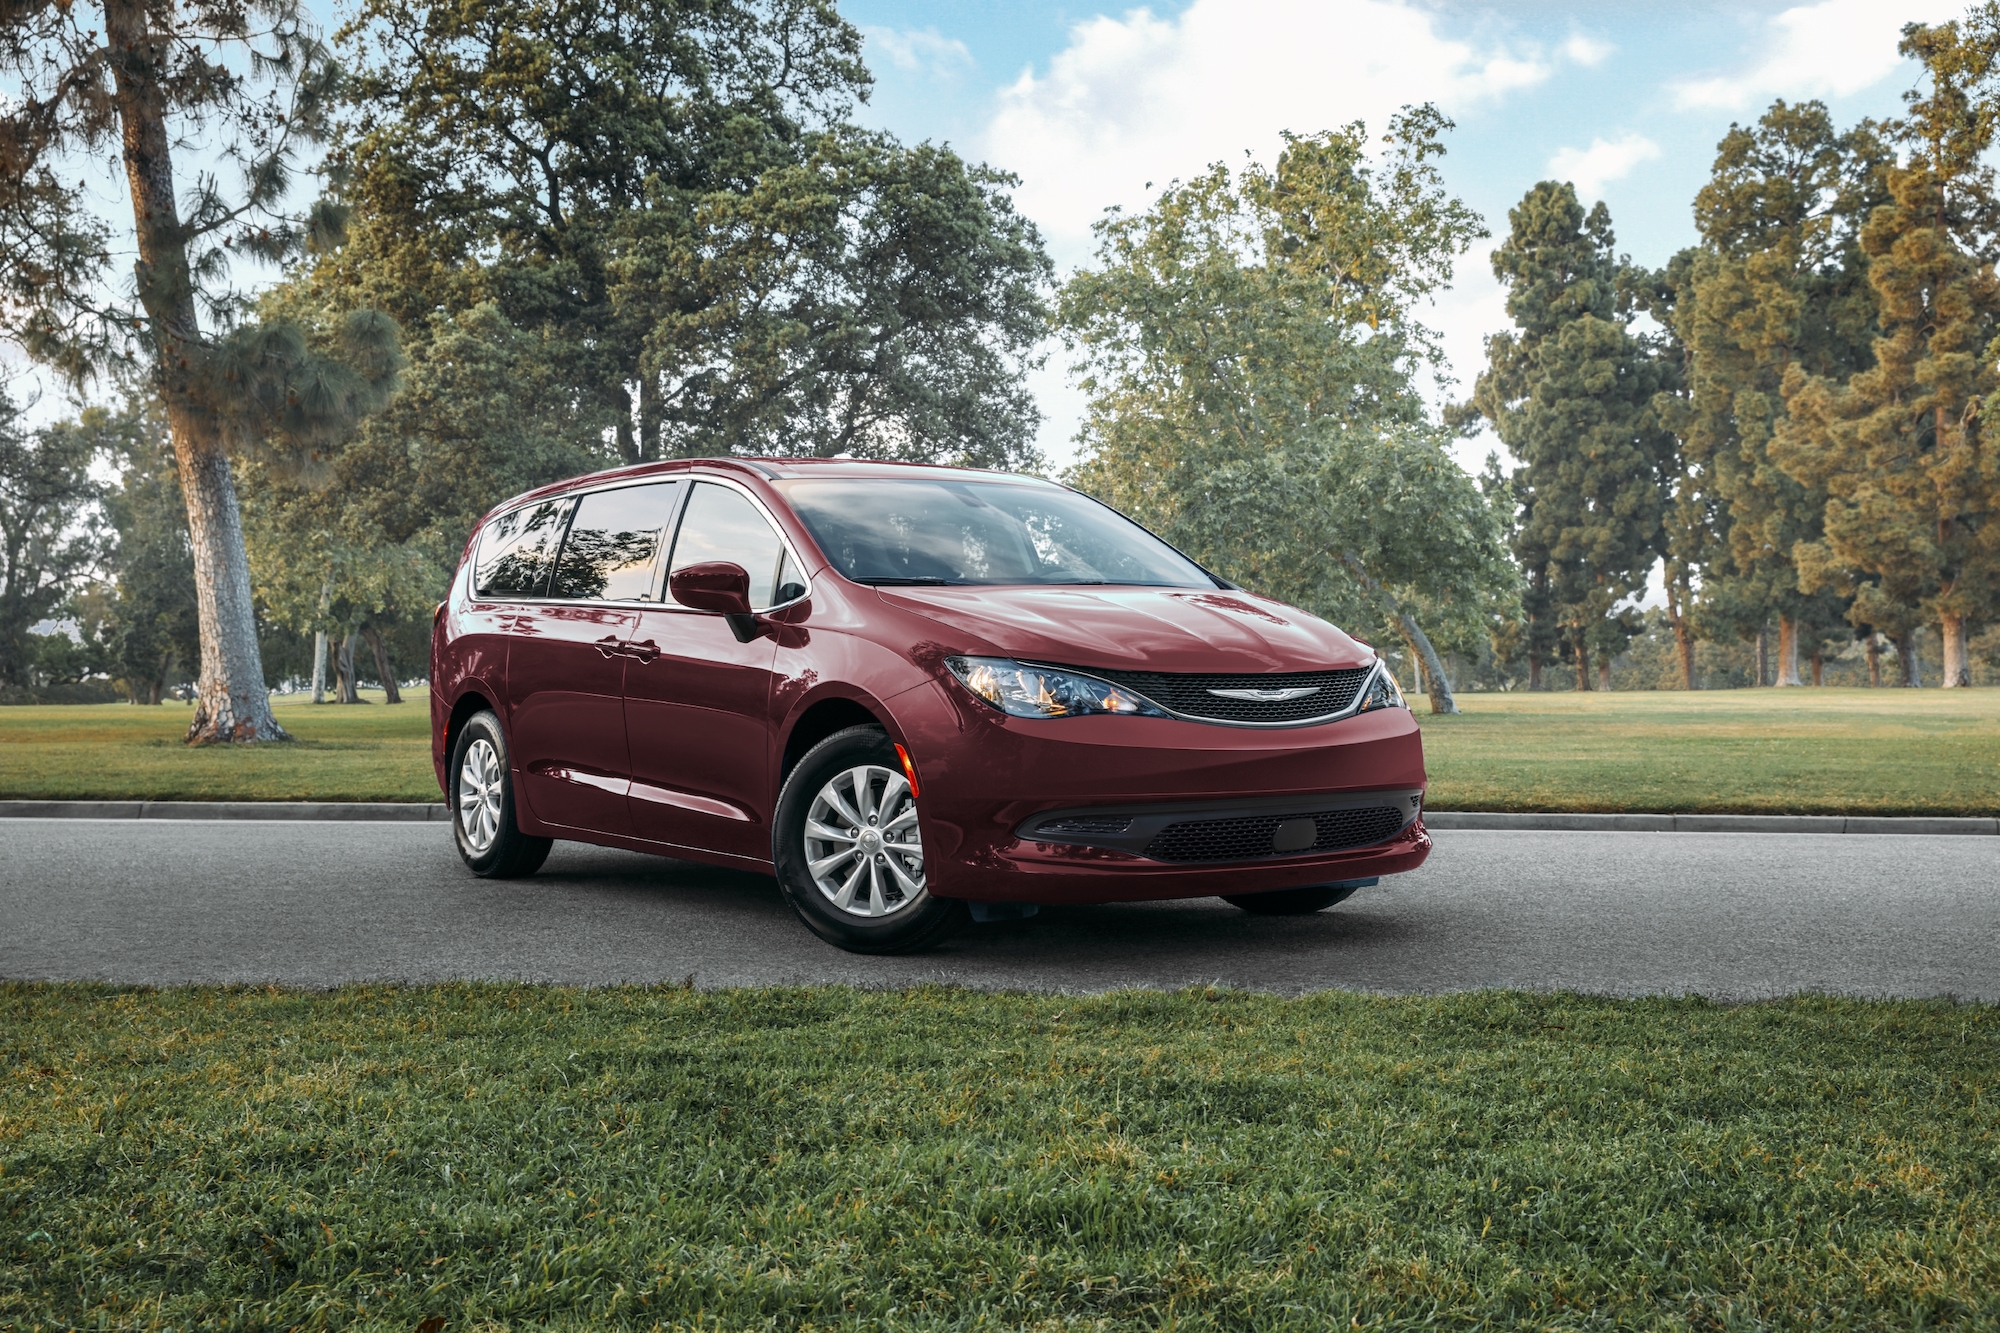 A dark-red 2021 Chrysler Voyager minivan parked on a suburban street surrounded by green grass and trees on a mostly sunny day